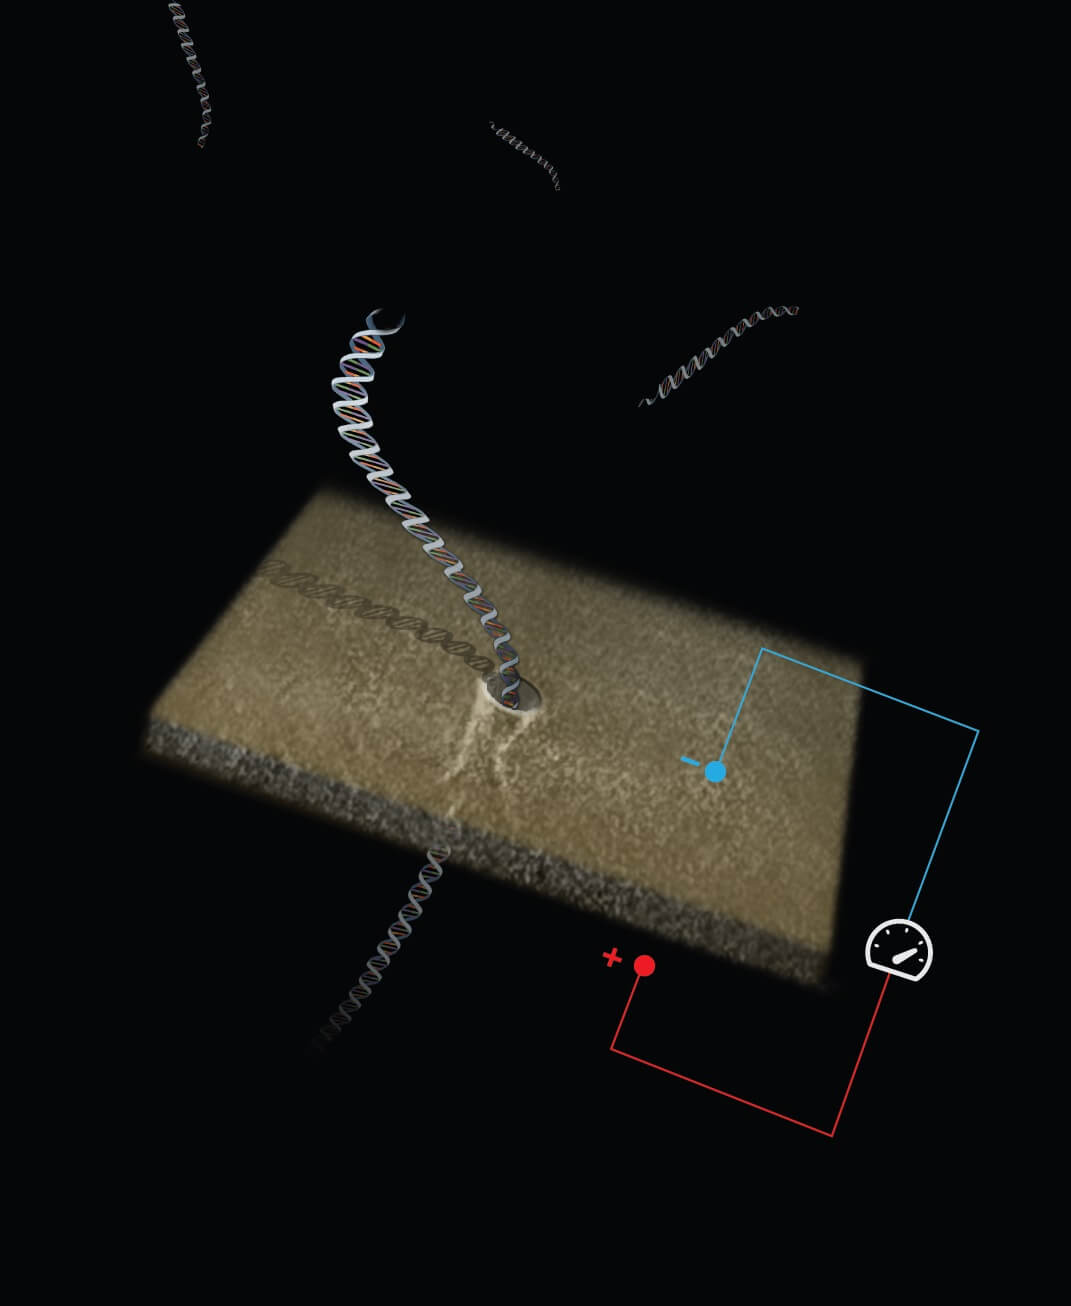 Illustration of DNA being transported through a nanometer pore. Courtesy of Prof. Amit Meler, Technion